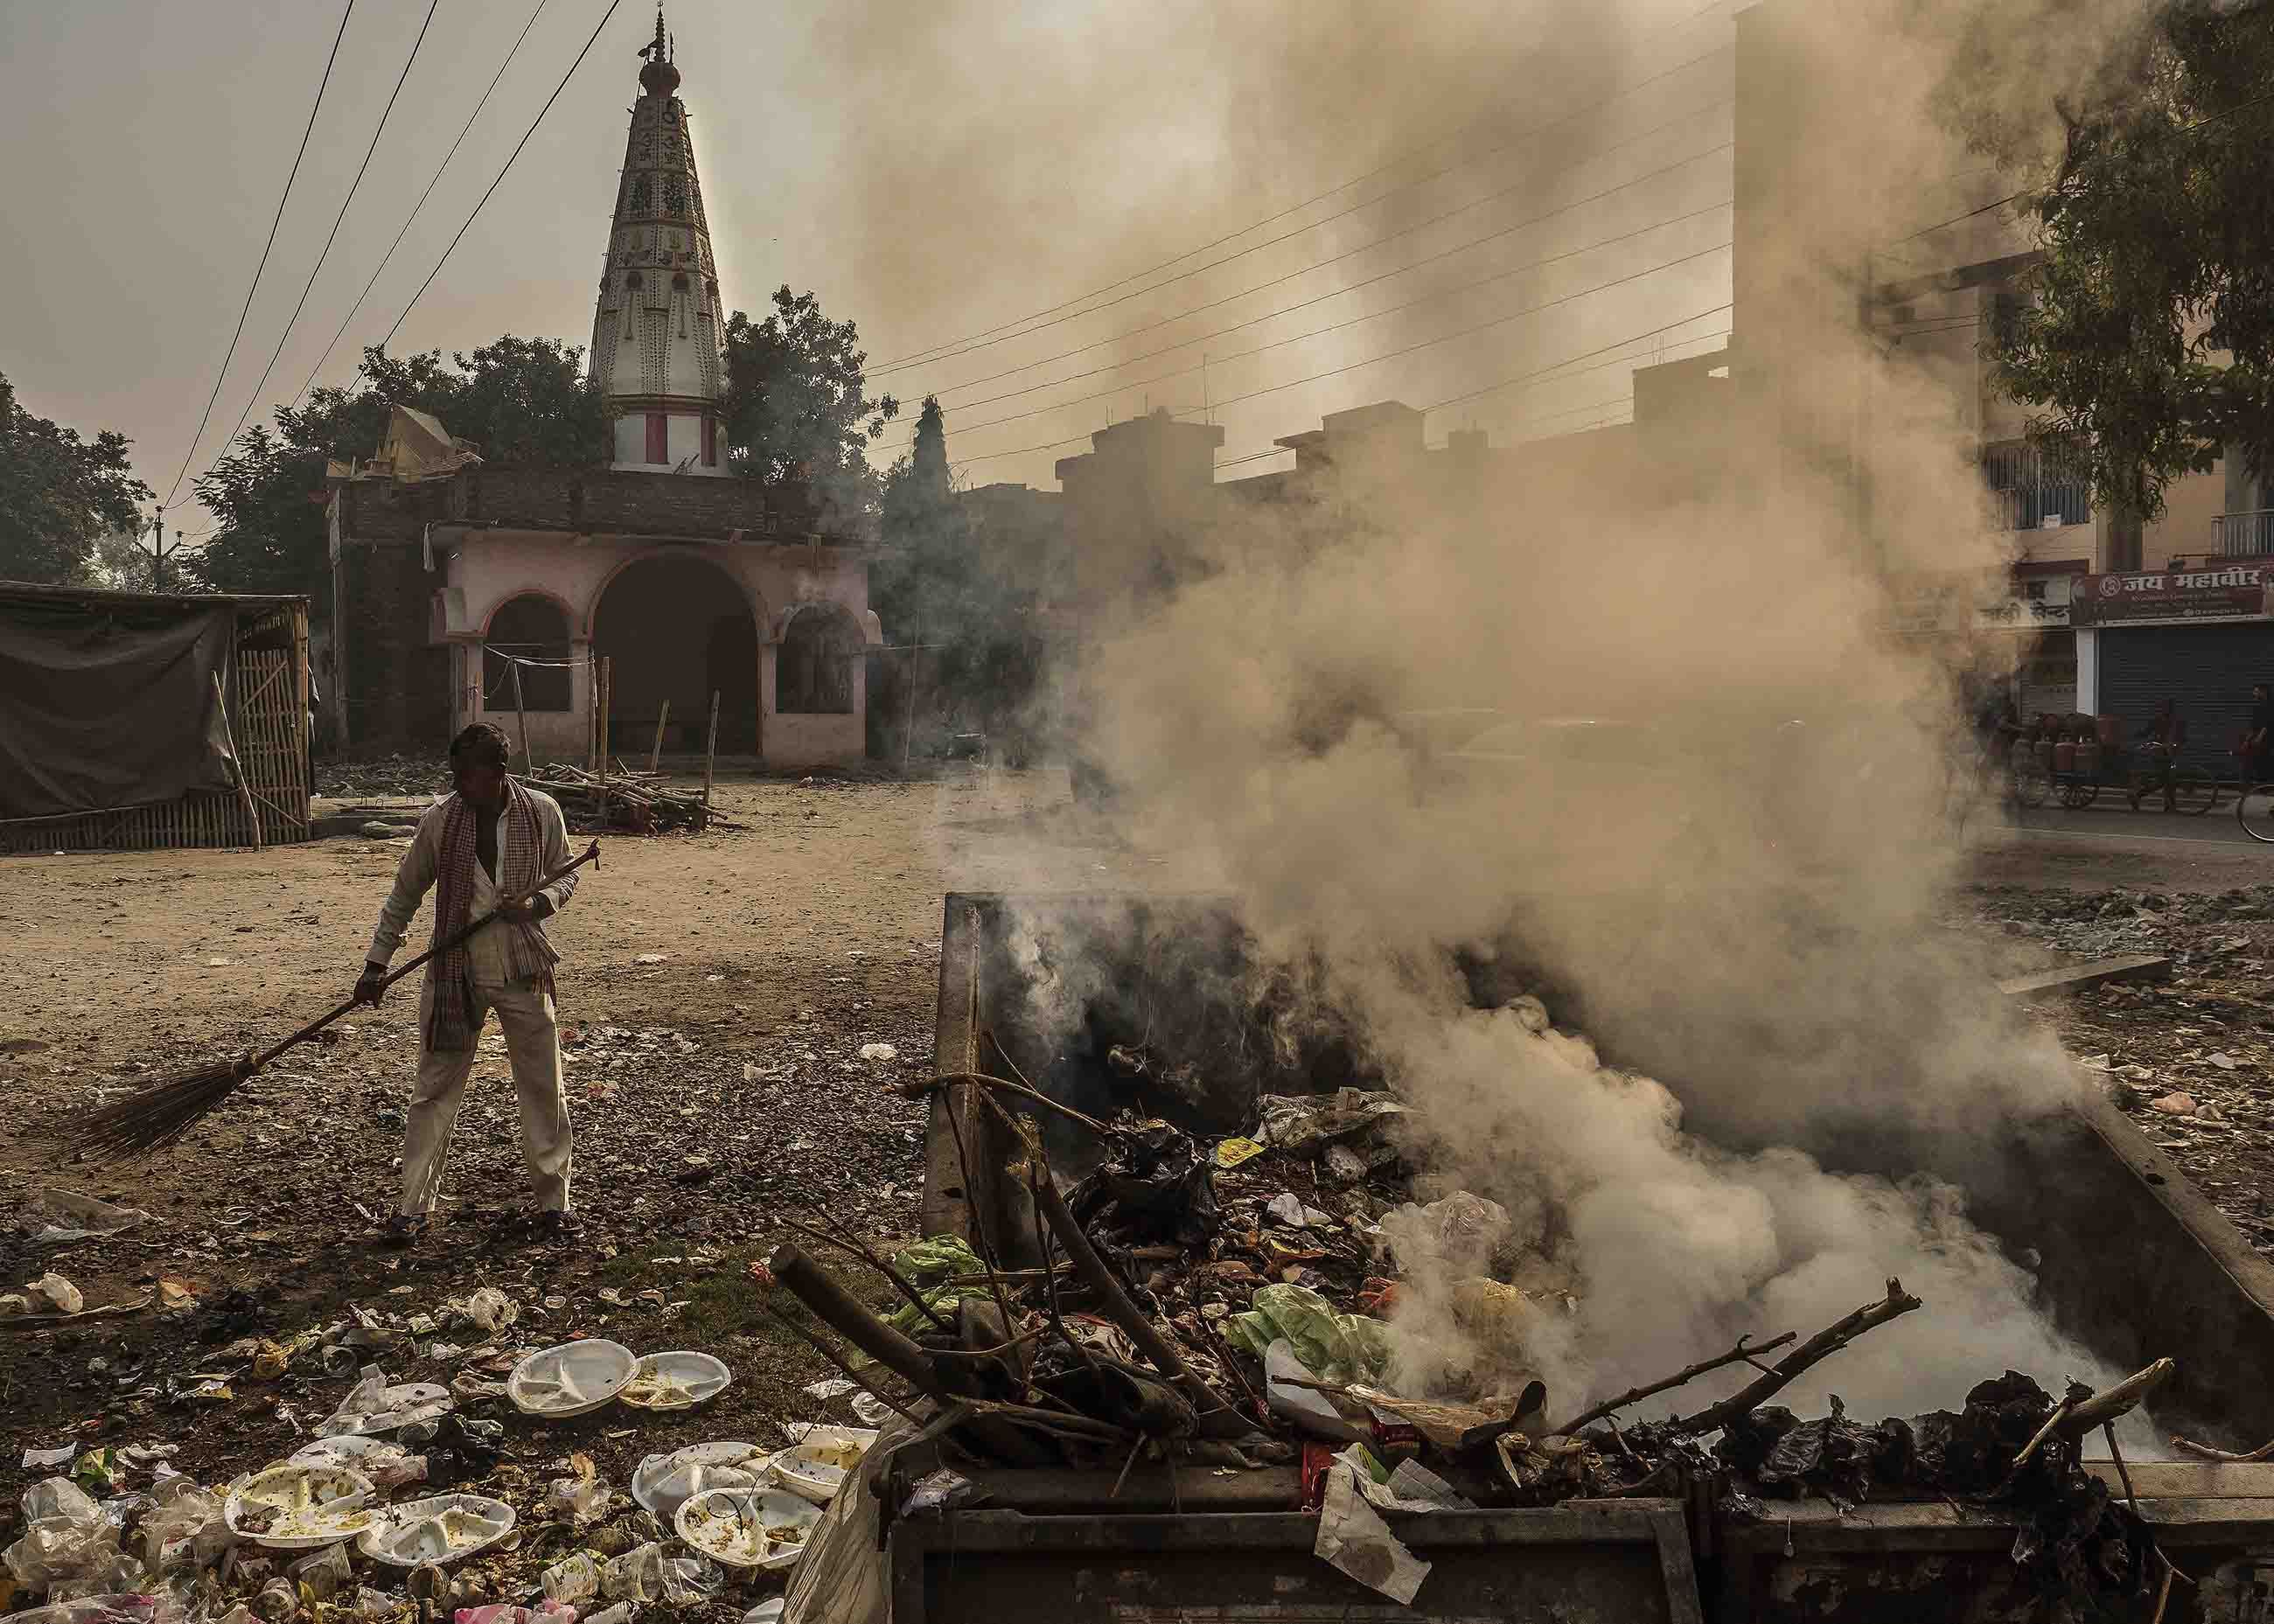 Patna has a waste-disposal issue and in many neighborhoods, trash is simply discarded on the streets and burned, contributing to the unrelenting pollution. Image by Larry C. Price. India, 2018.